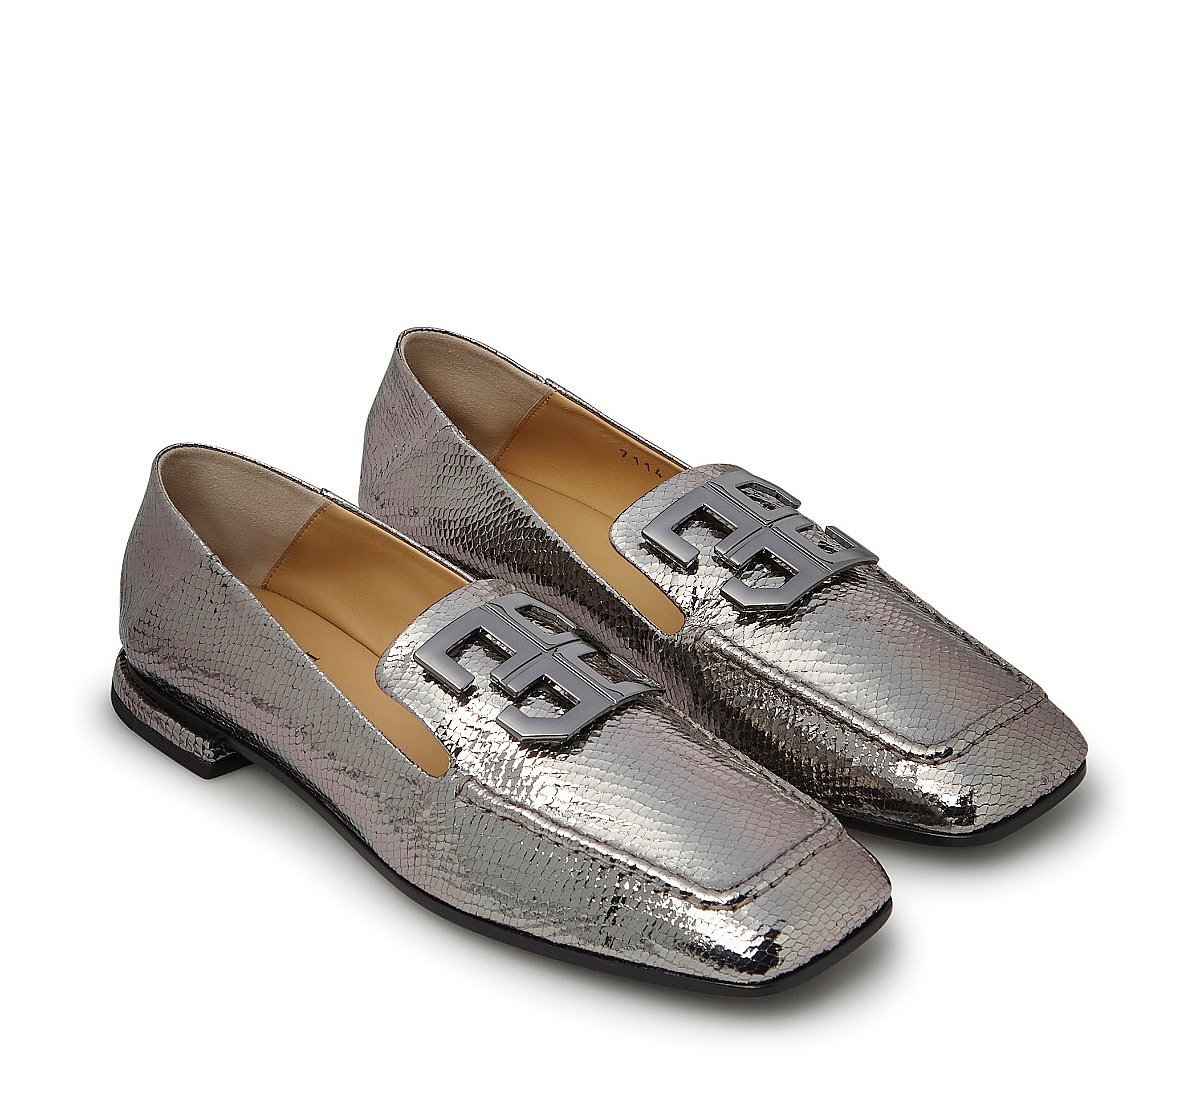 Loafer in exquisite calfskin